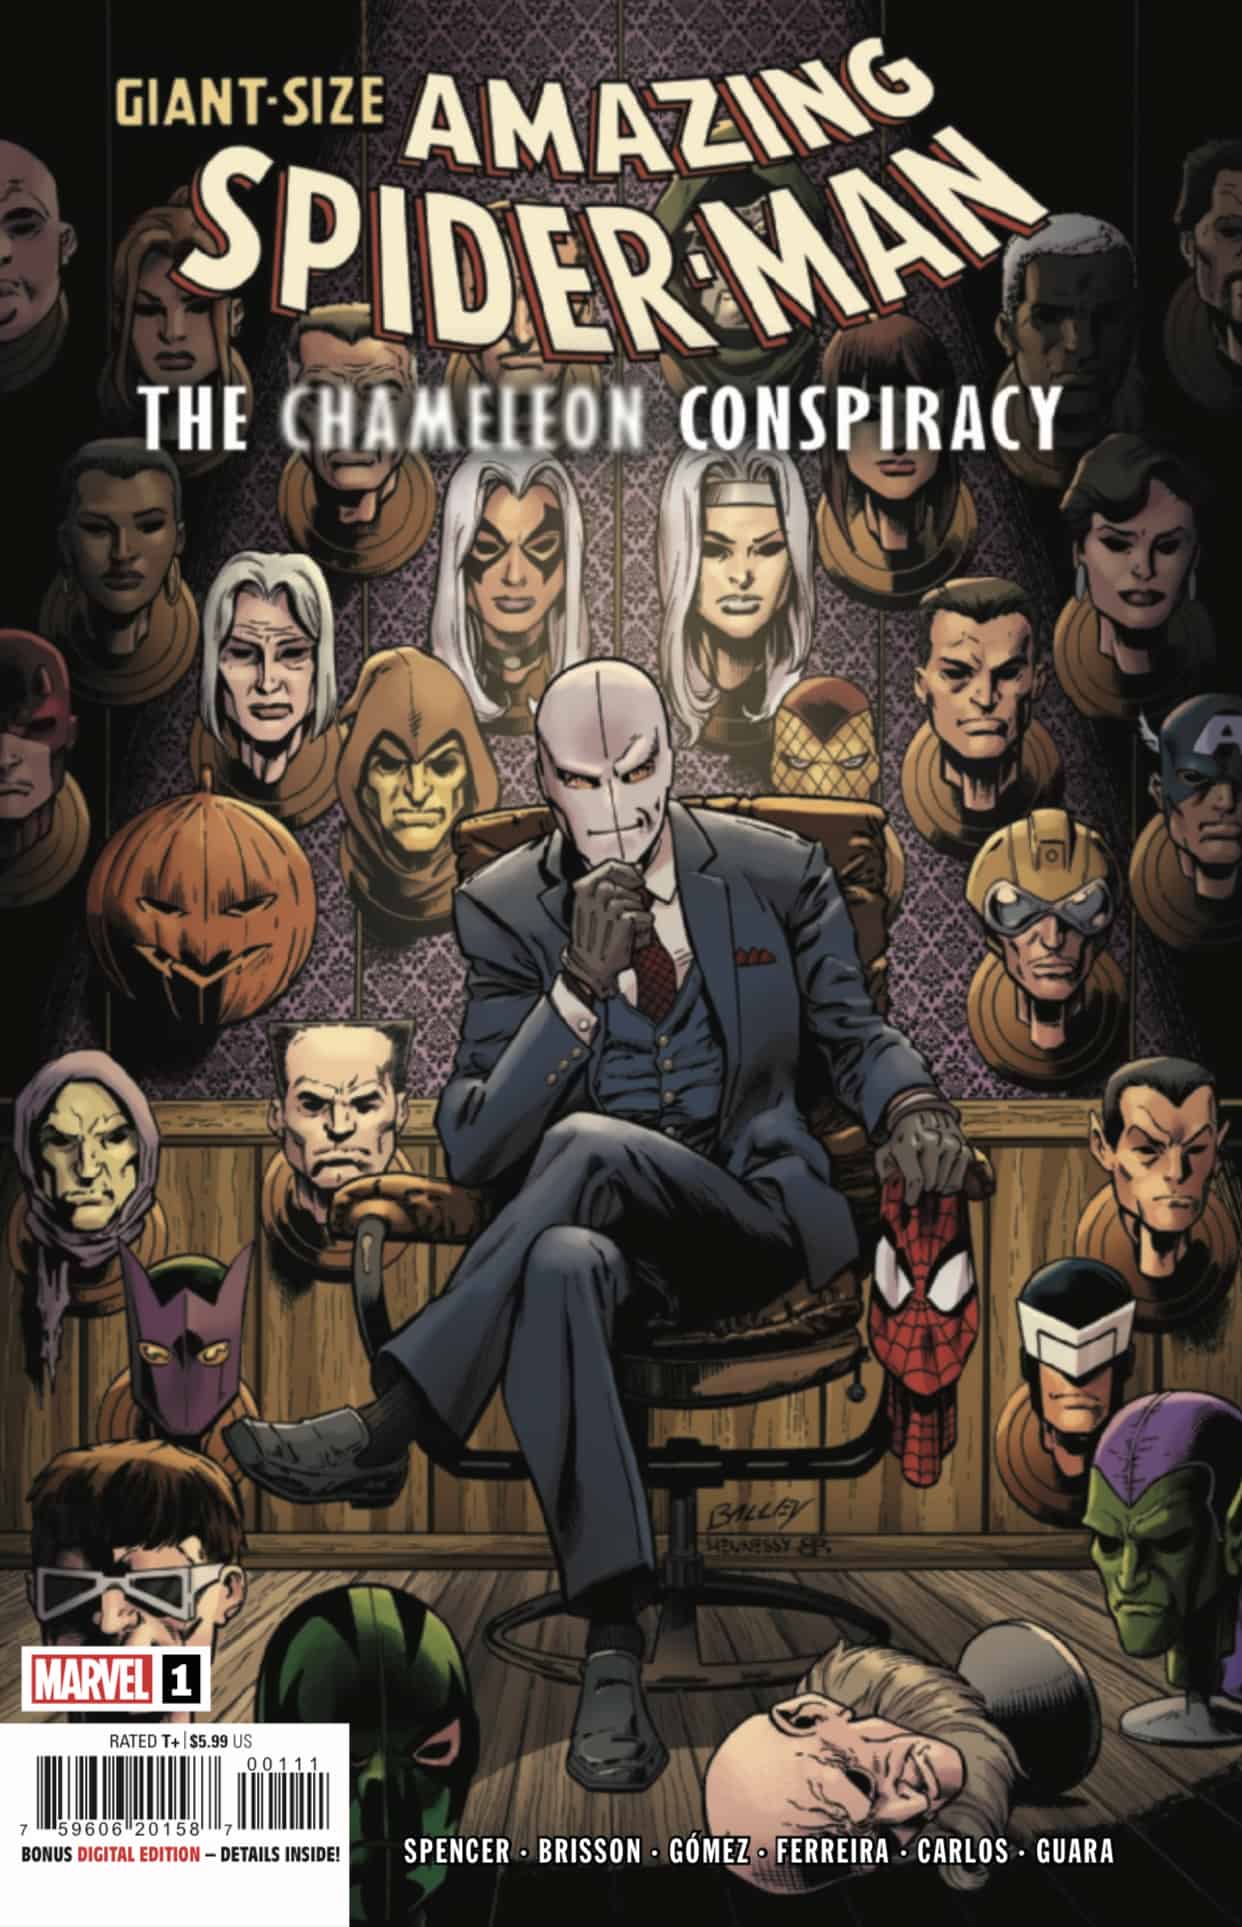 Giant-Size Amazing Spider-Man: The Chameleon Conspiracy #1: I Want You to  Show Me The Way - Comic Watch